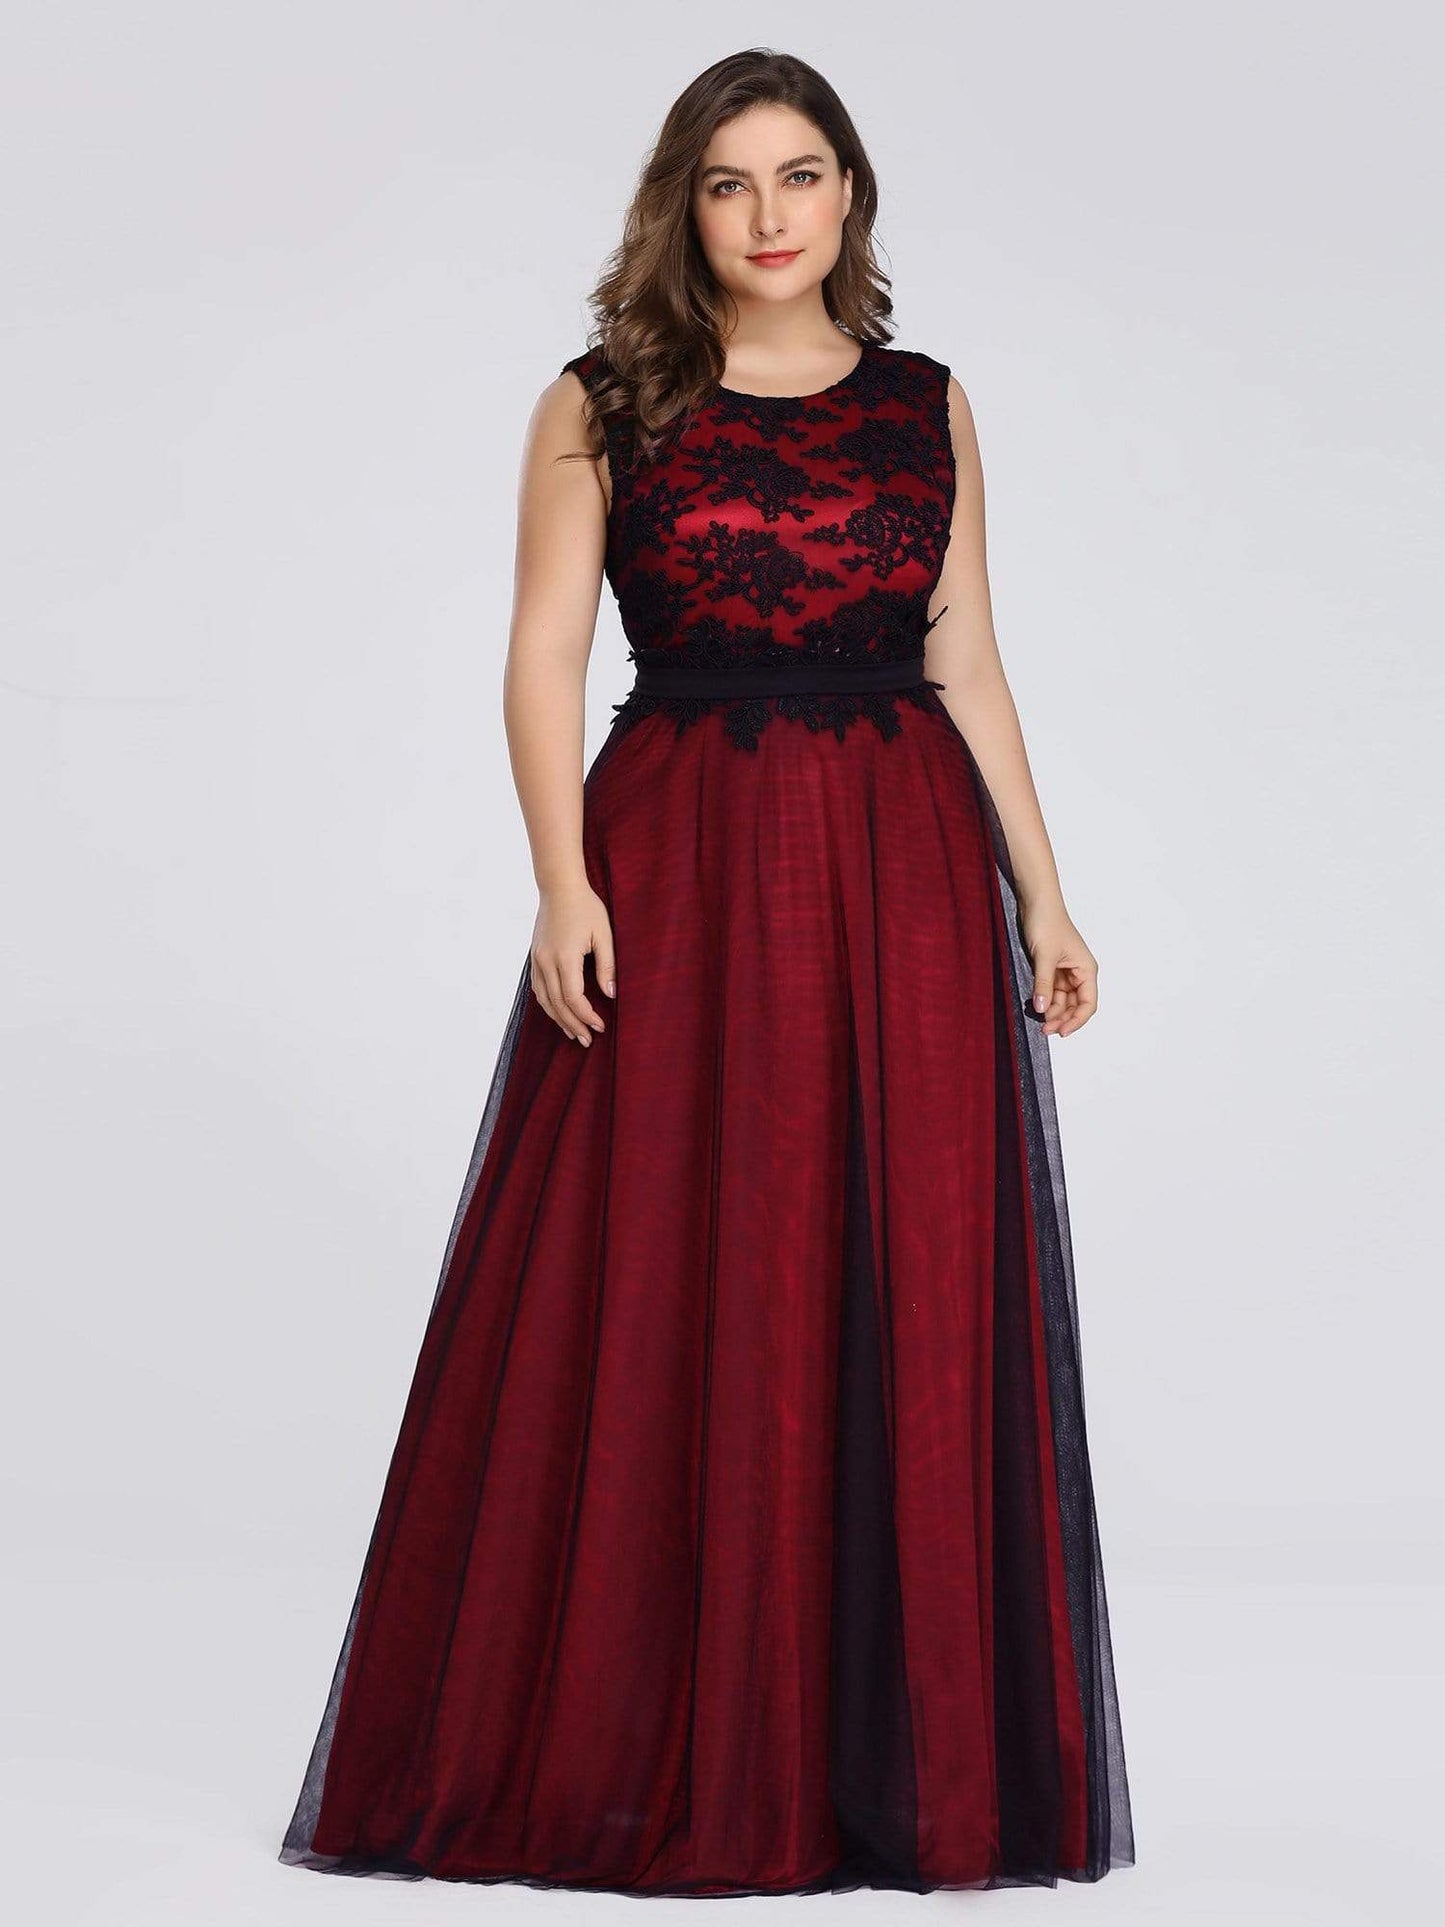 Plus Size Lace Wholsesale Evening Dresses with Black Brocade